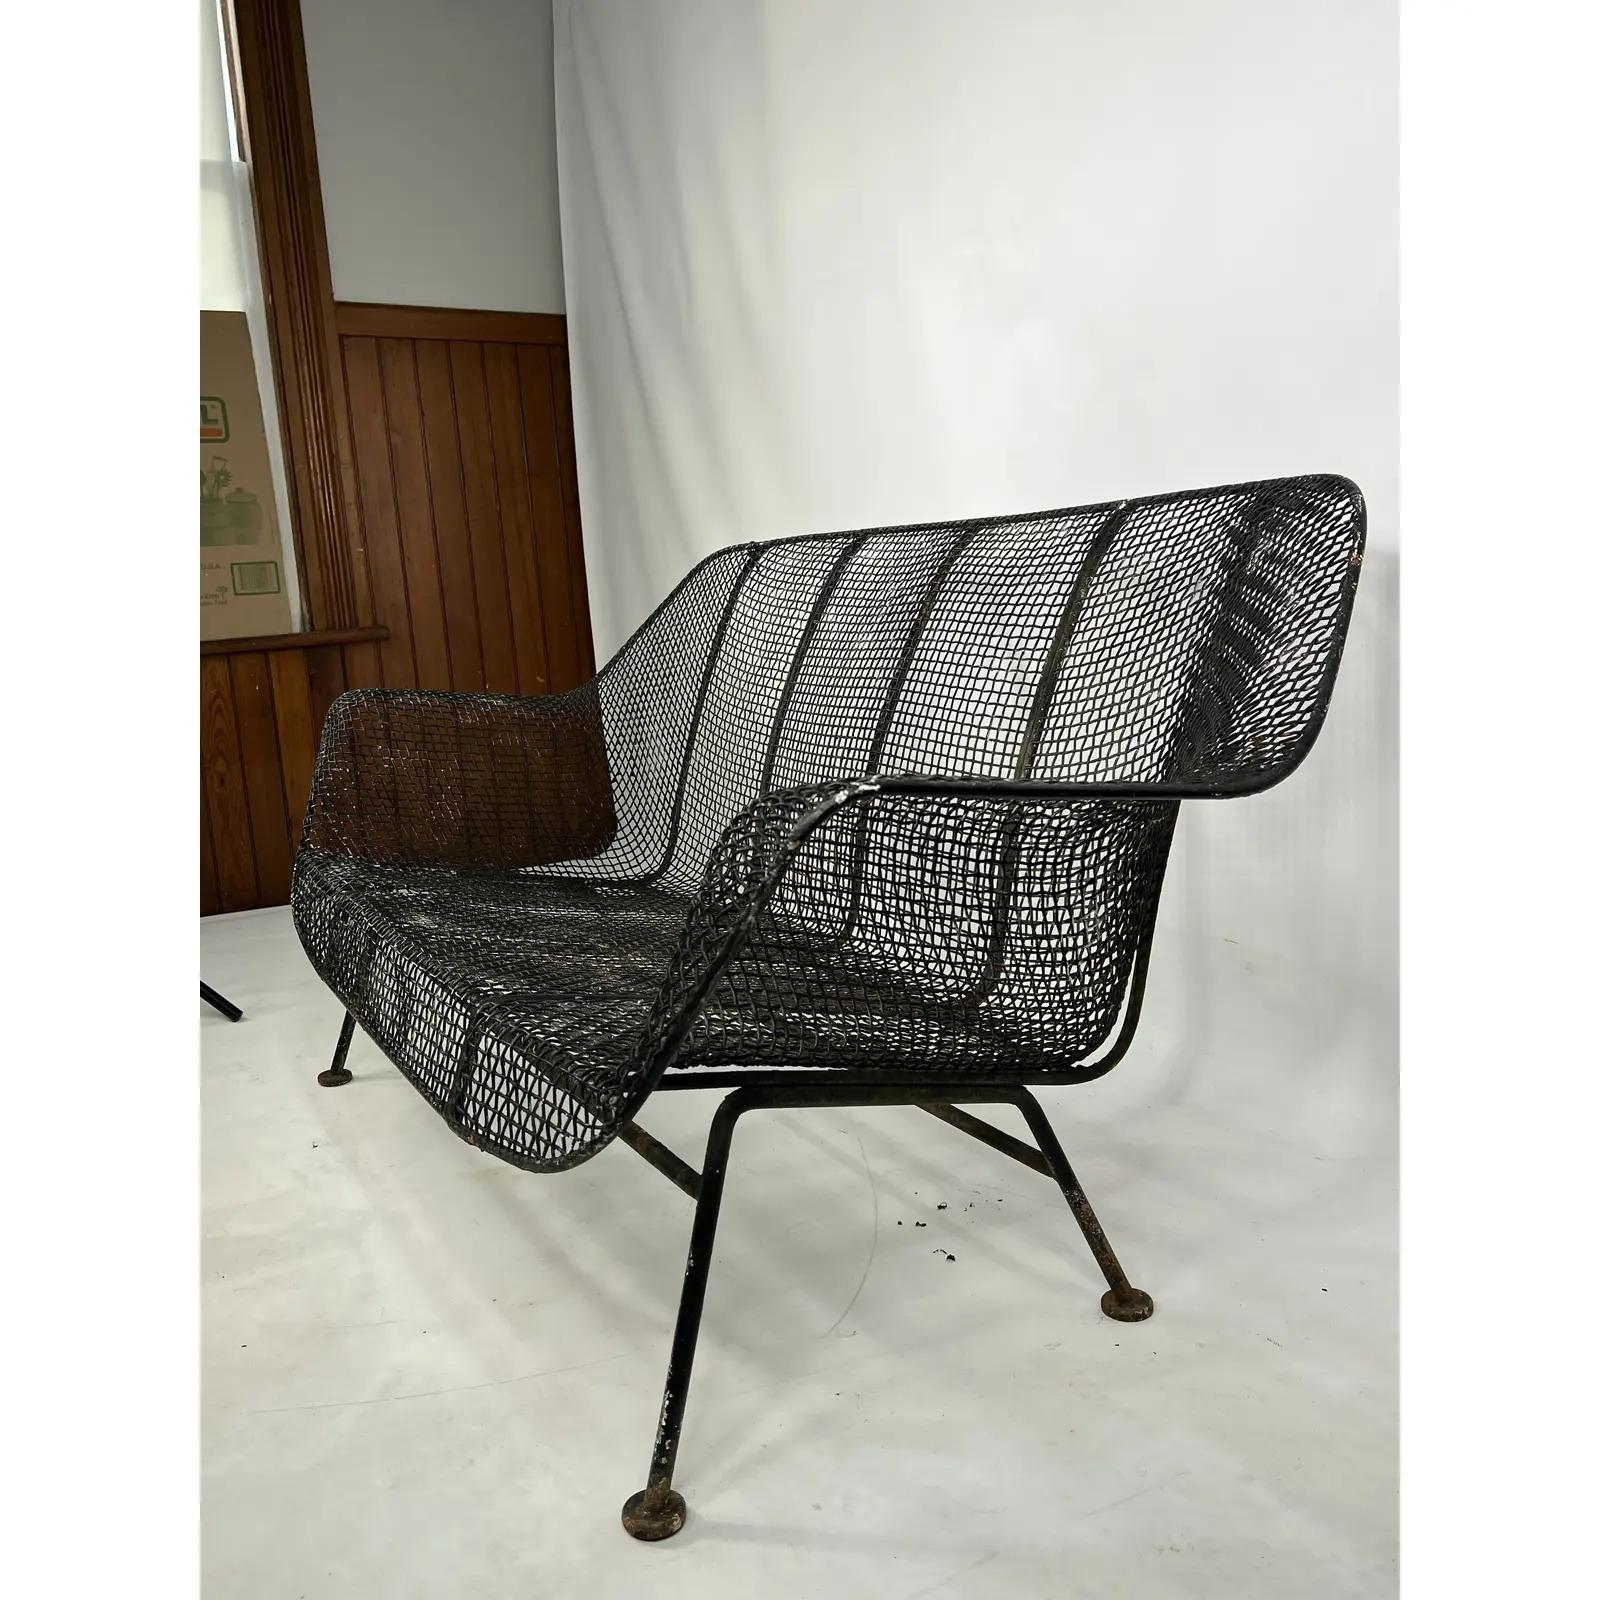 This Russell Woodard Patio Loveseat is made out of wrought iron with steel and mesh. This would make an amazing centerpiece for any outdoor area.